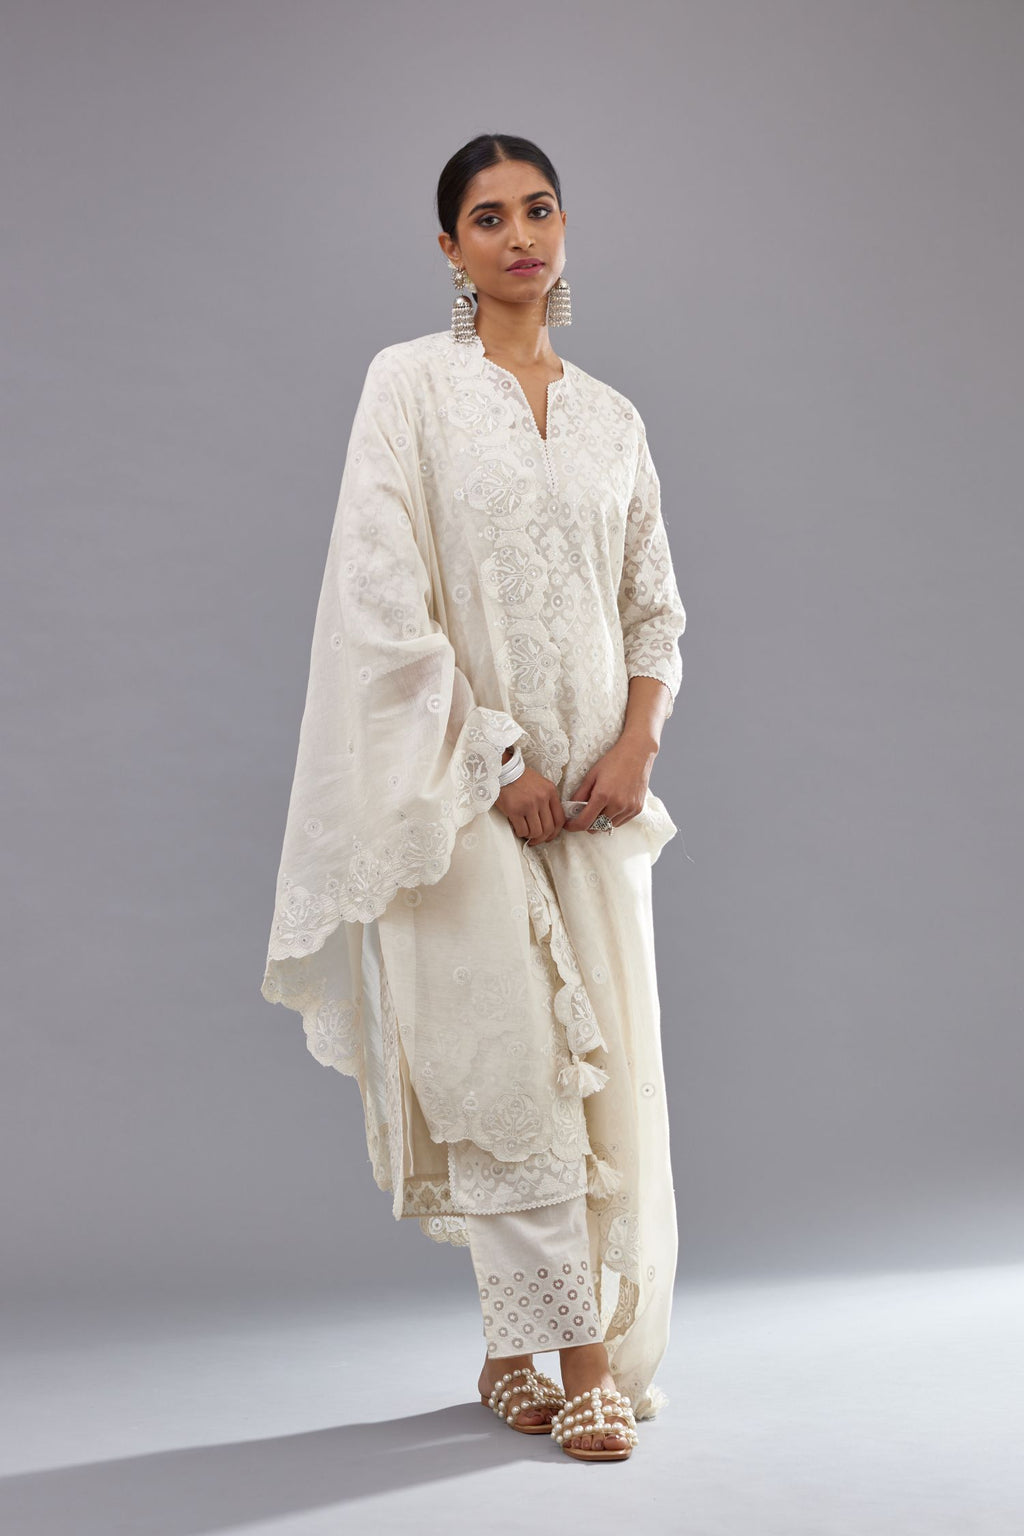 Off white straight kurta set with all-over cotton appliqué trellis jaal, highlighted with sequins.